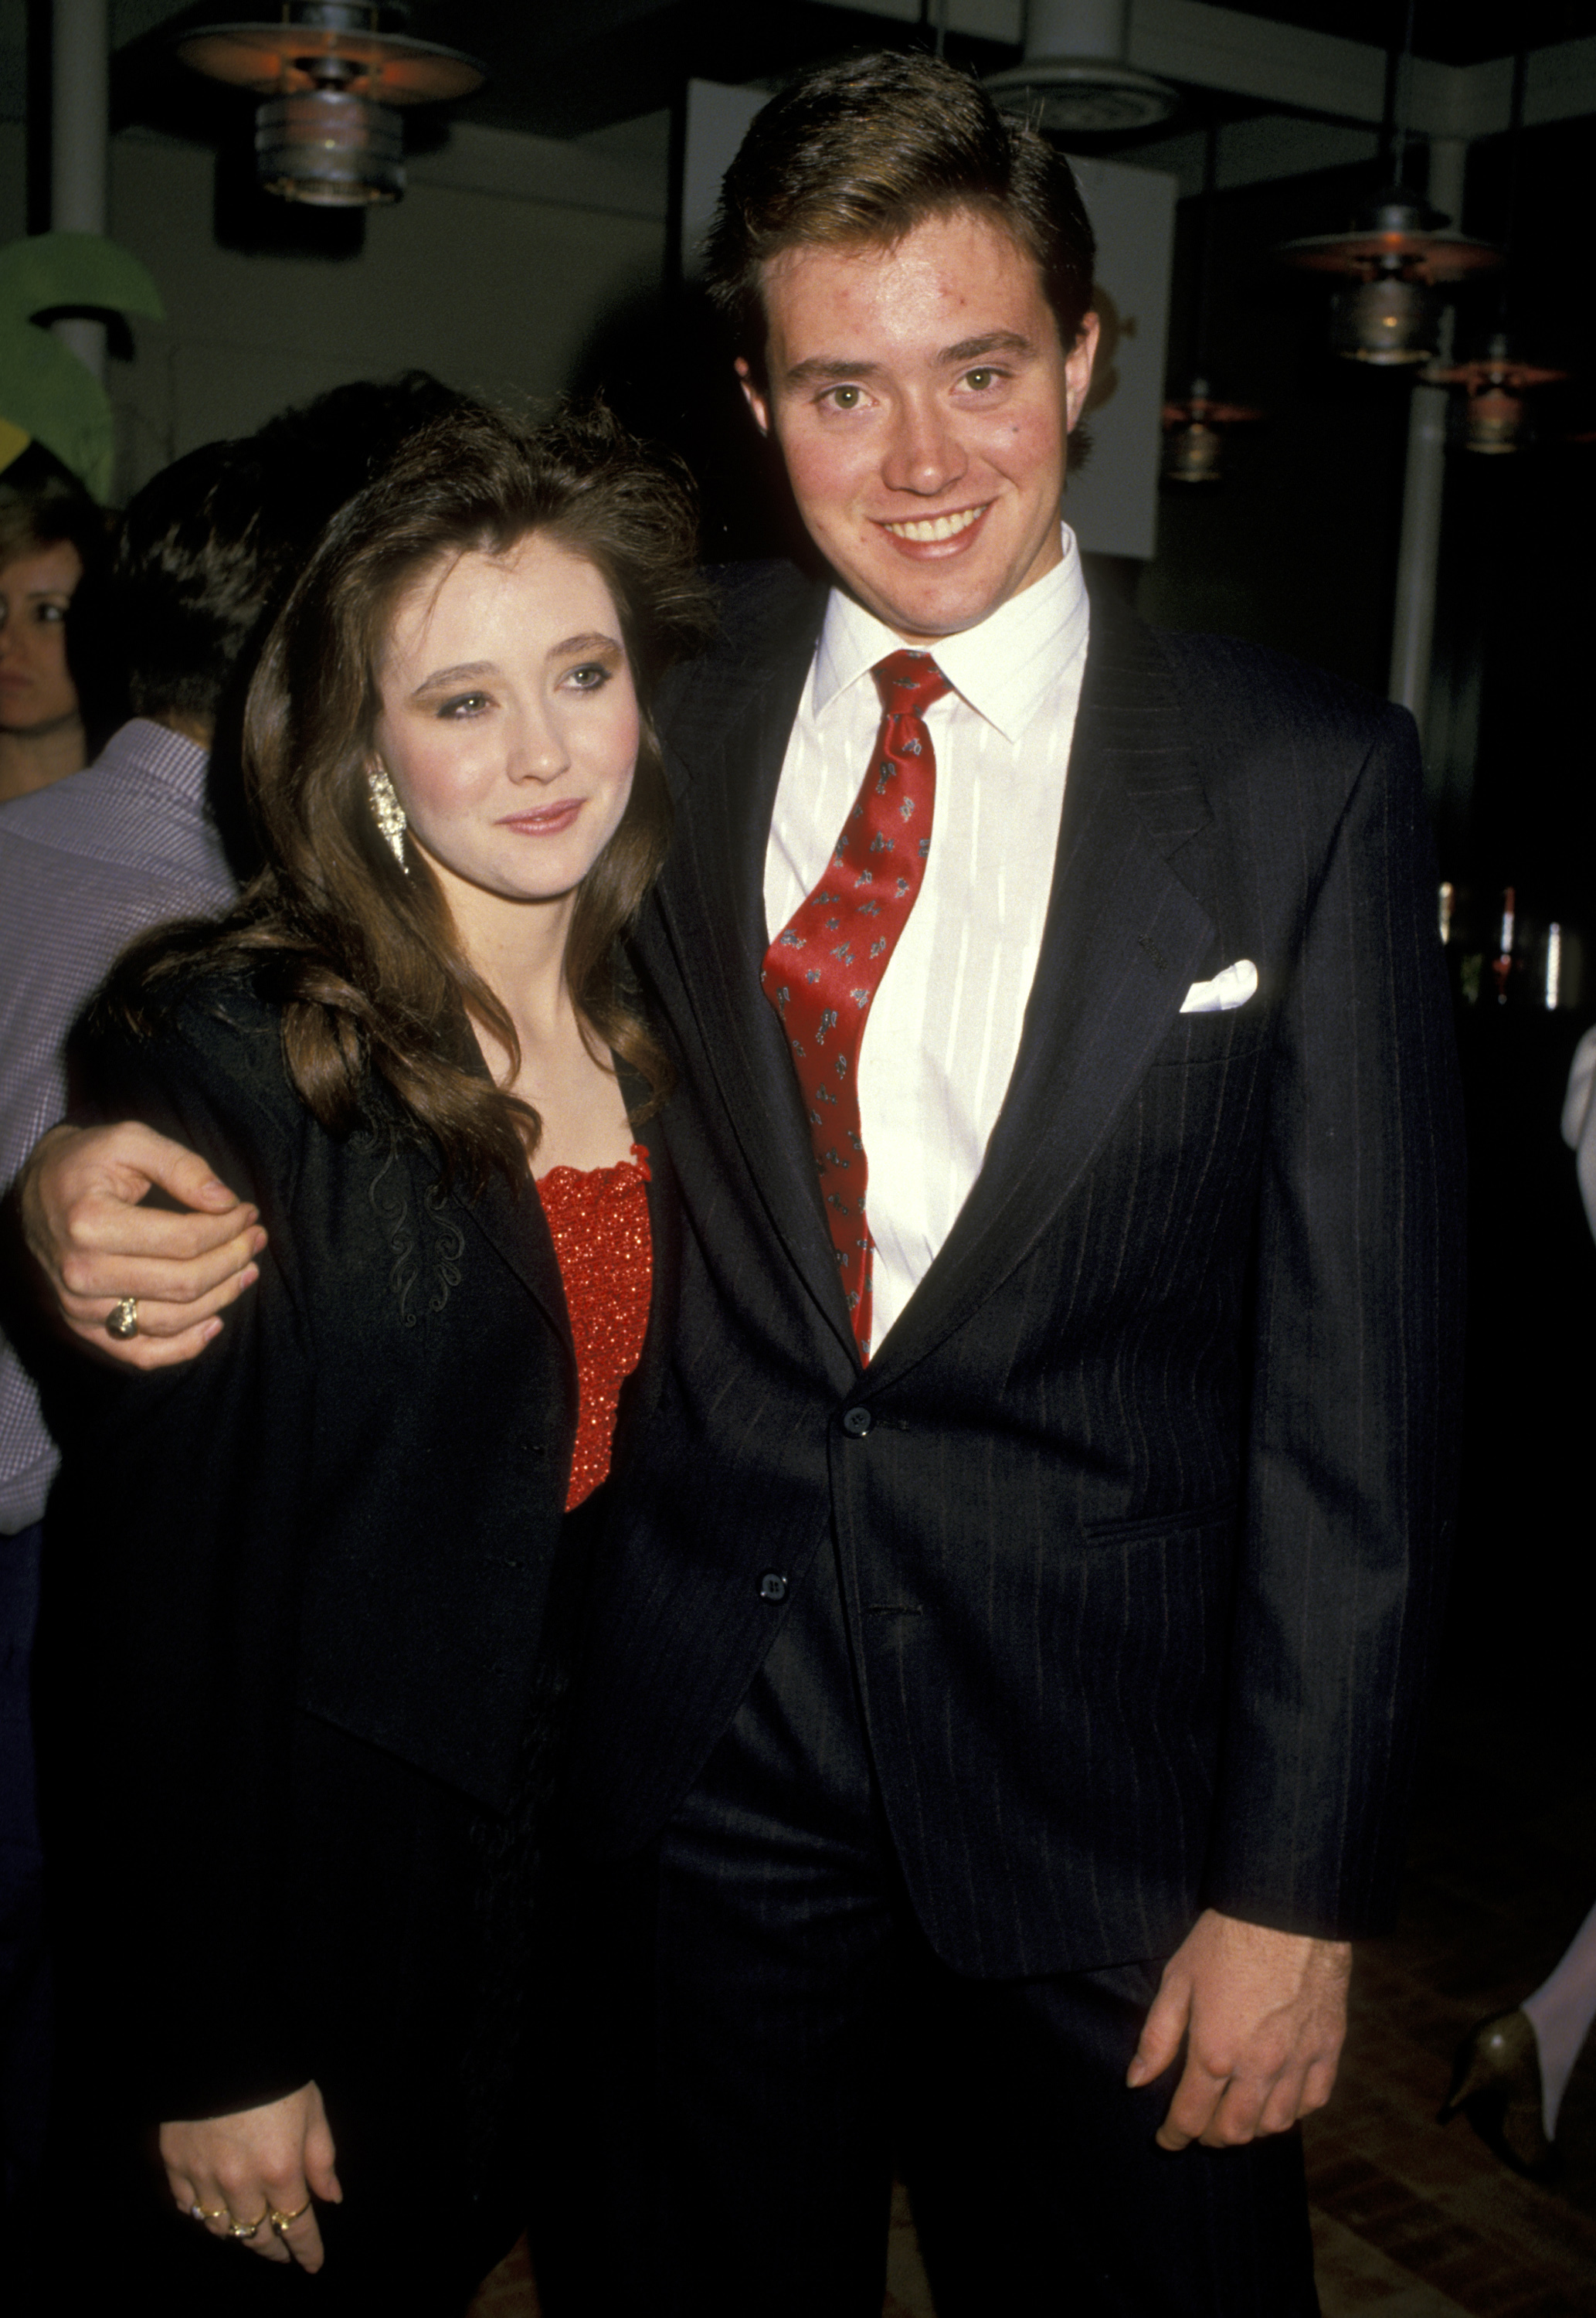 Shannen Doherty and Sean Doherty during "Century City Market Place" grand opening on November 18, 1987 at Century City Market Place, in Los Angeles, California. | Source: Getty Images